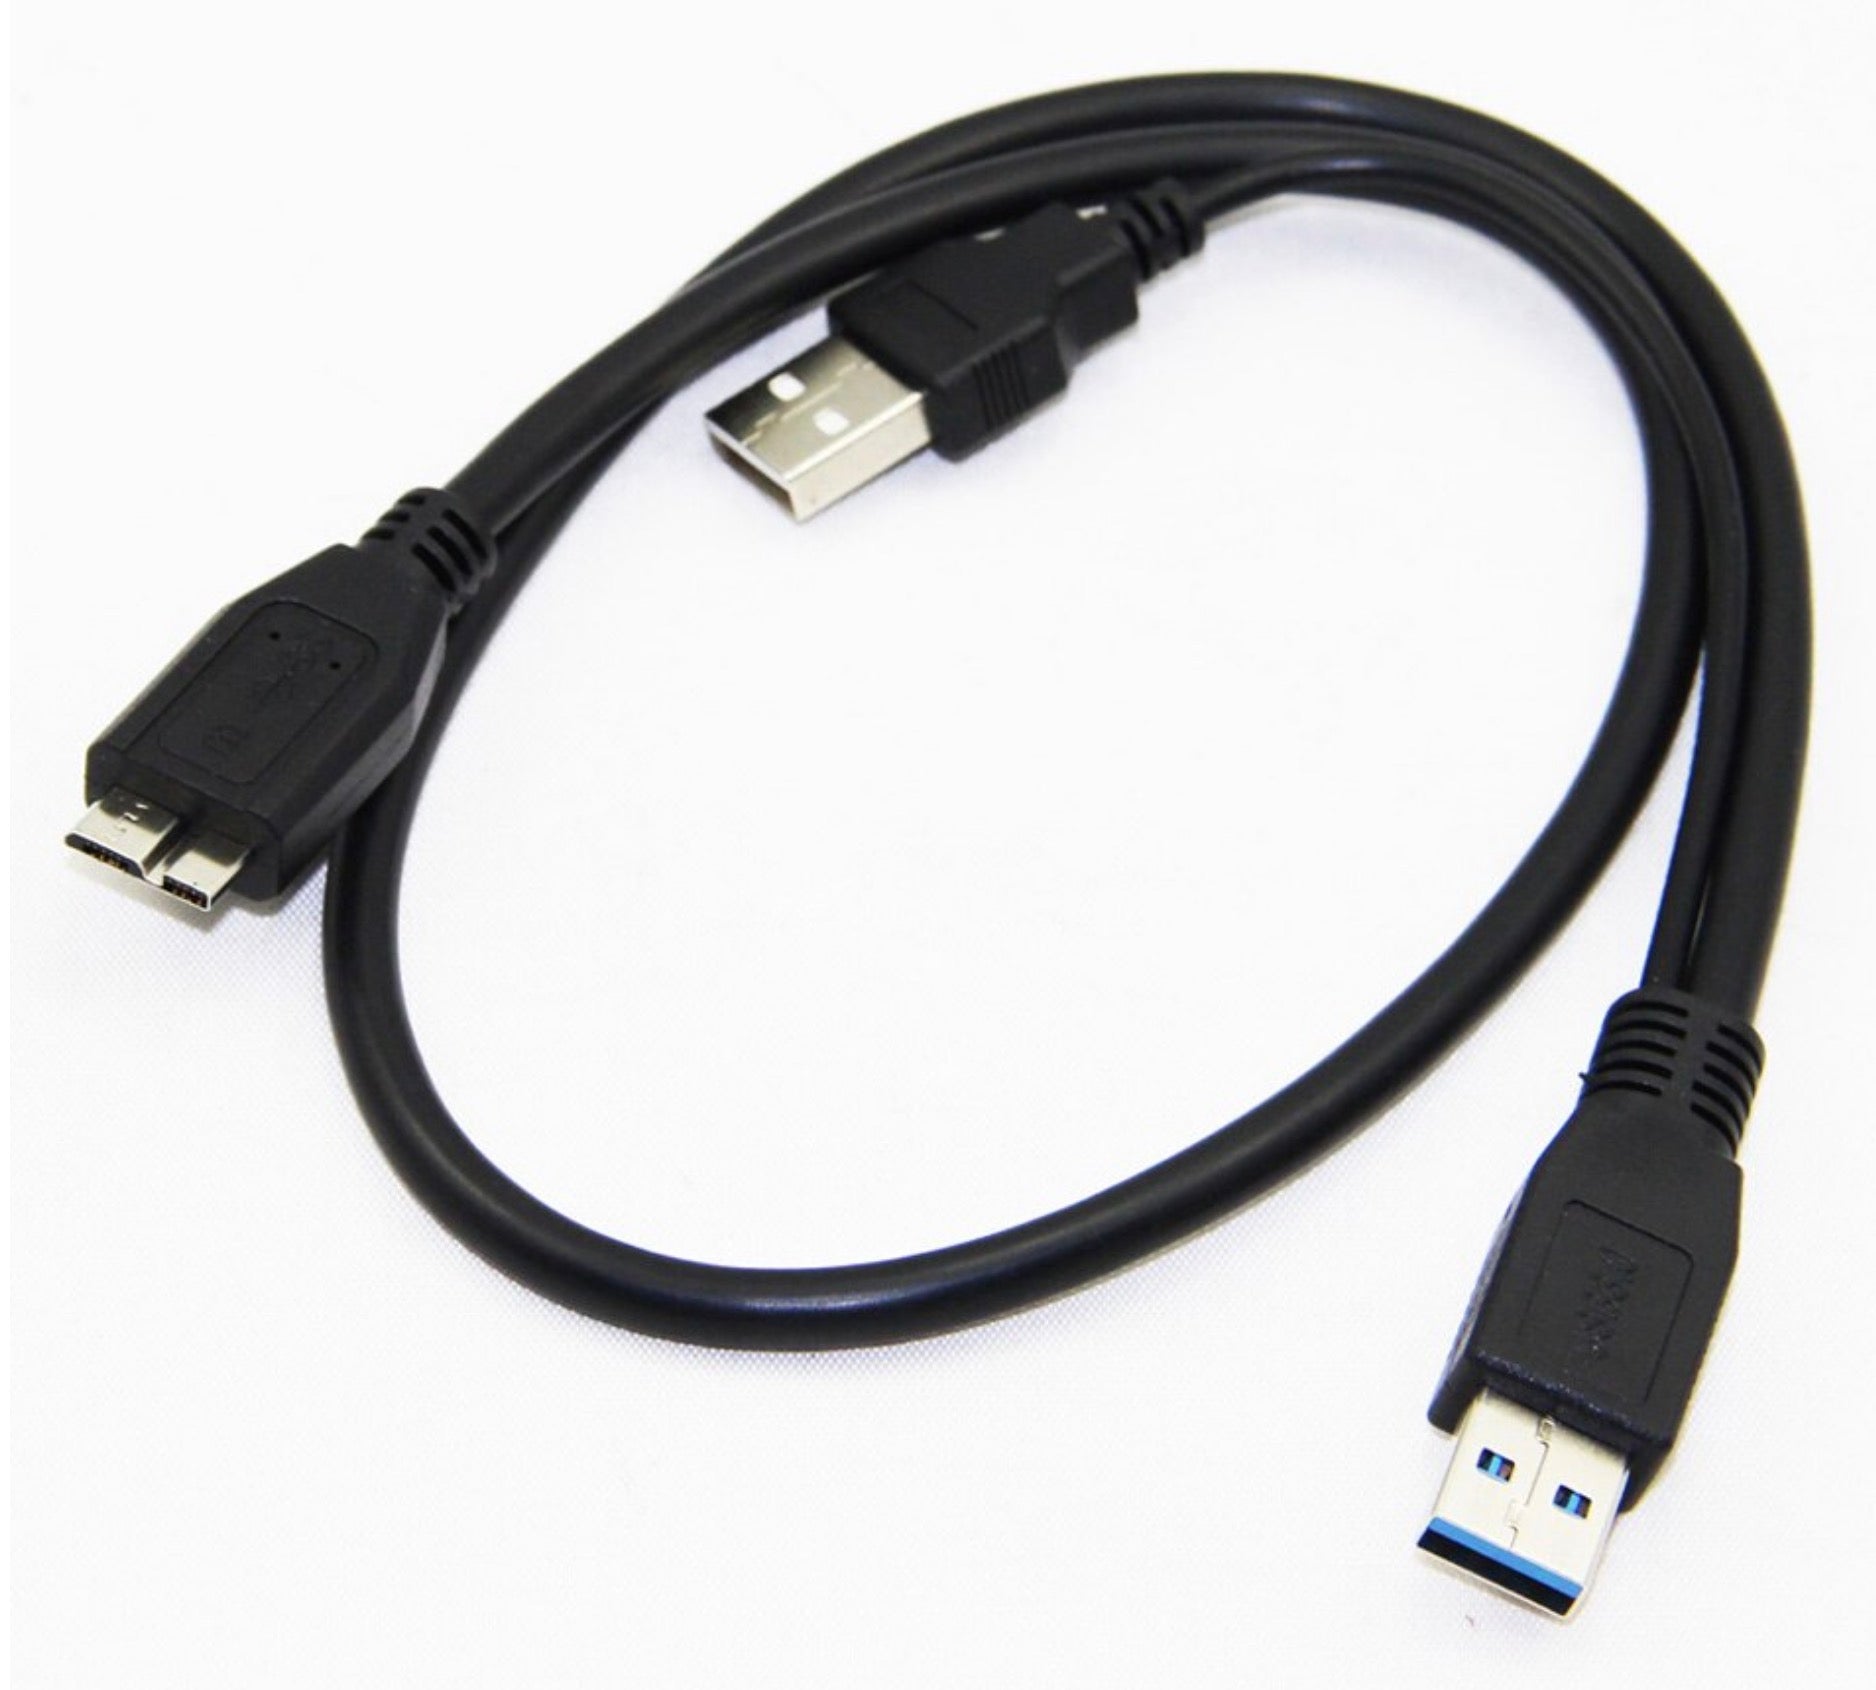 USB-A 3.0 Male to USB 3.0 Micro-B Male + USB 2.0 Power Supply Cable 0.6m